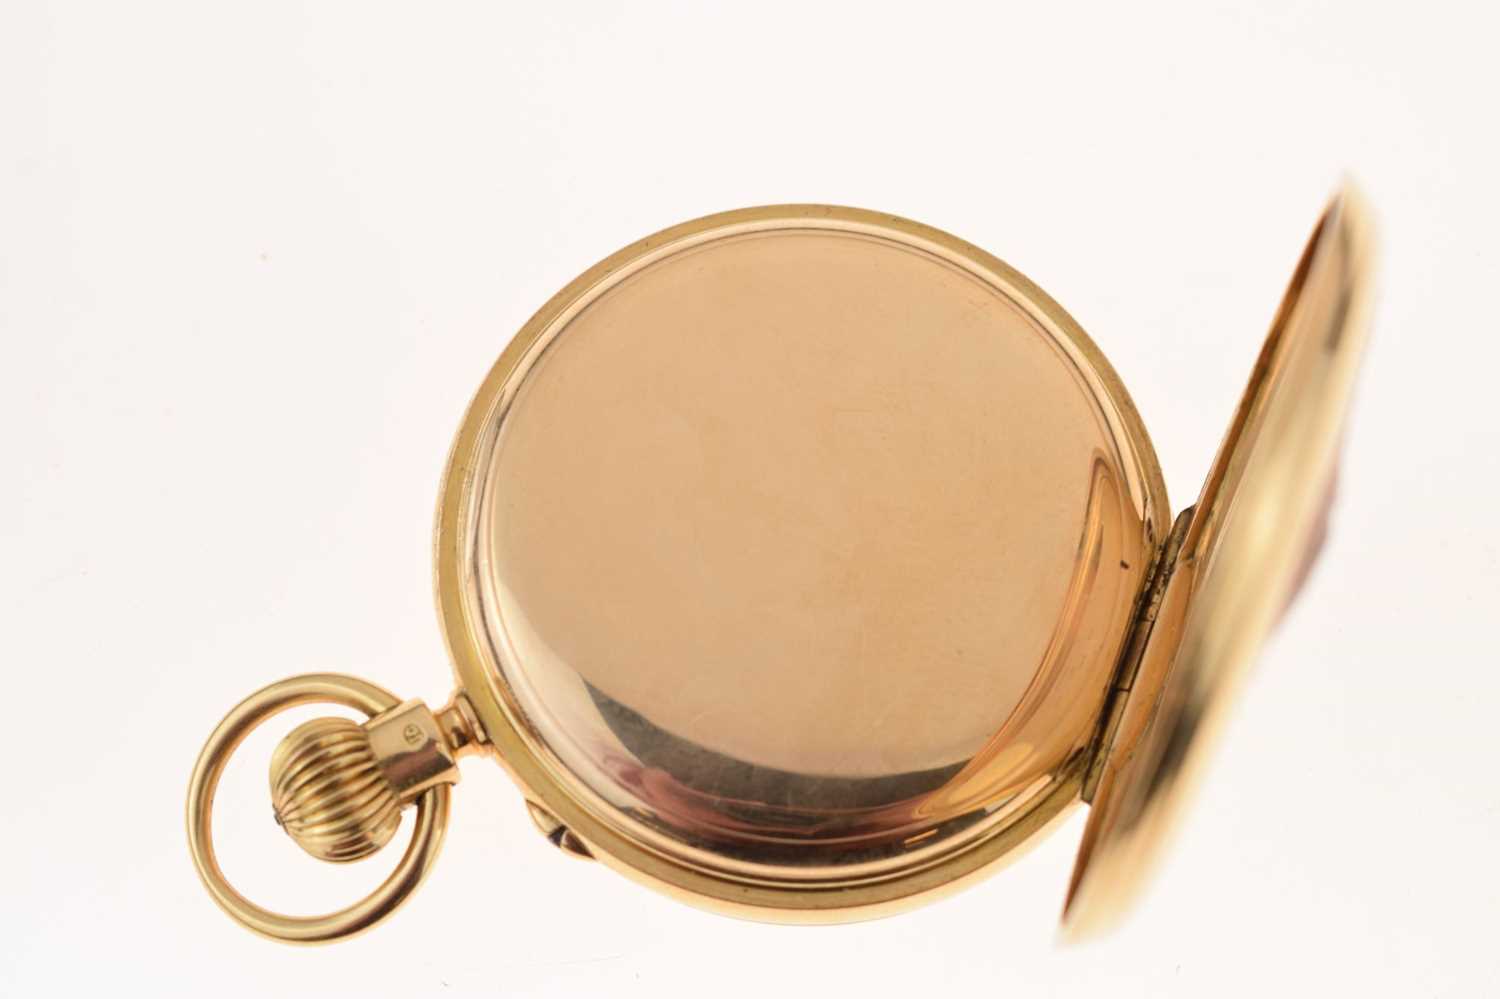 Barraud & Lunds, London - 18ct gold hunter pocket watch - Image 10 of 12